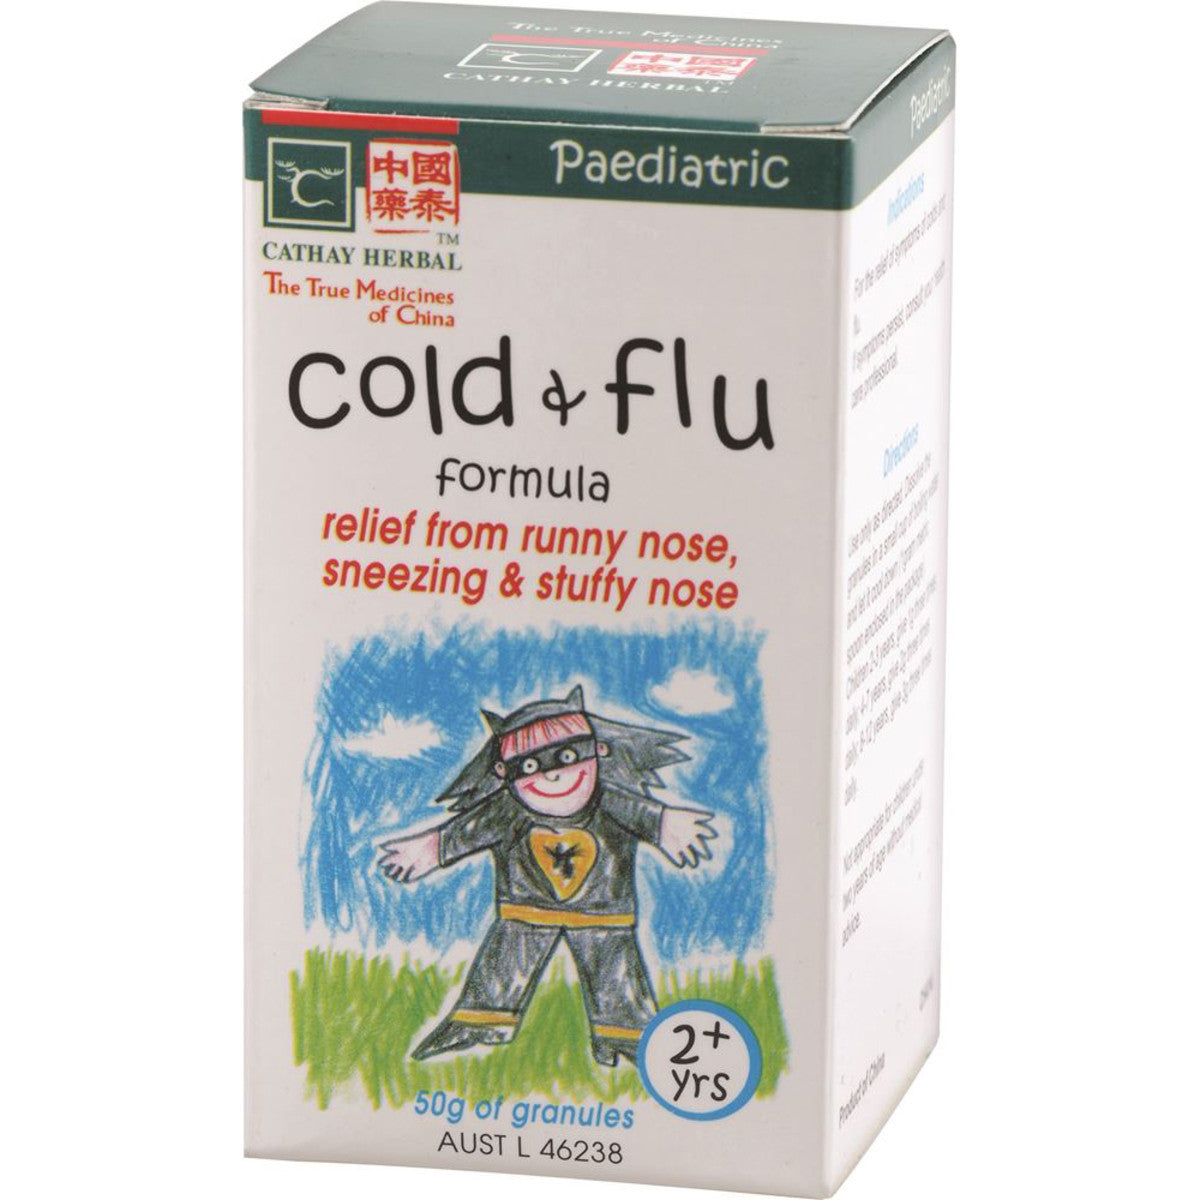 Cathay Herbal - Paediatric Cold and Flu Formula